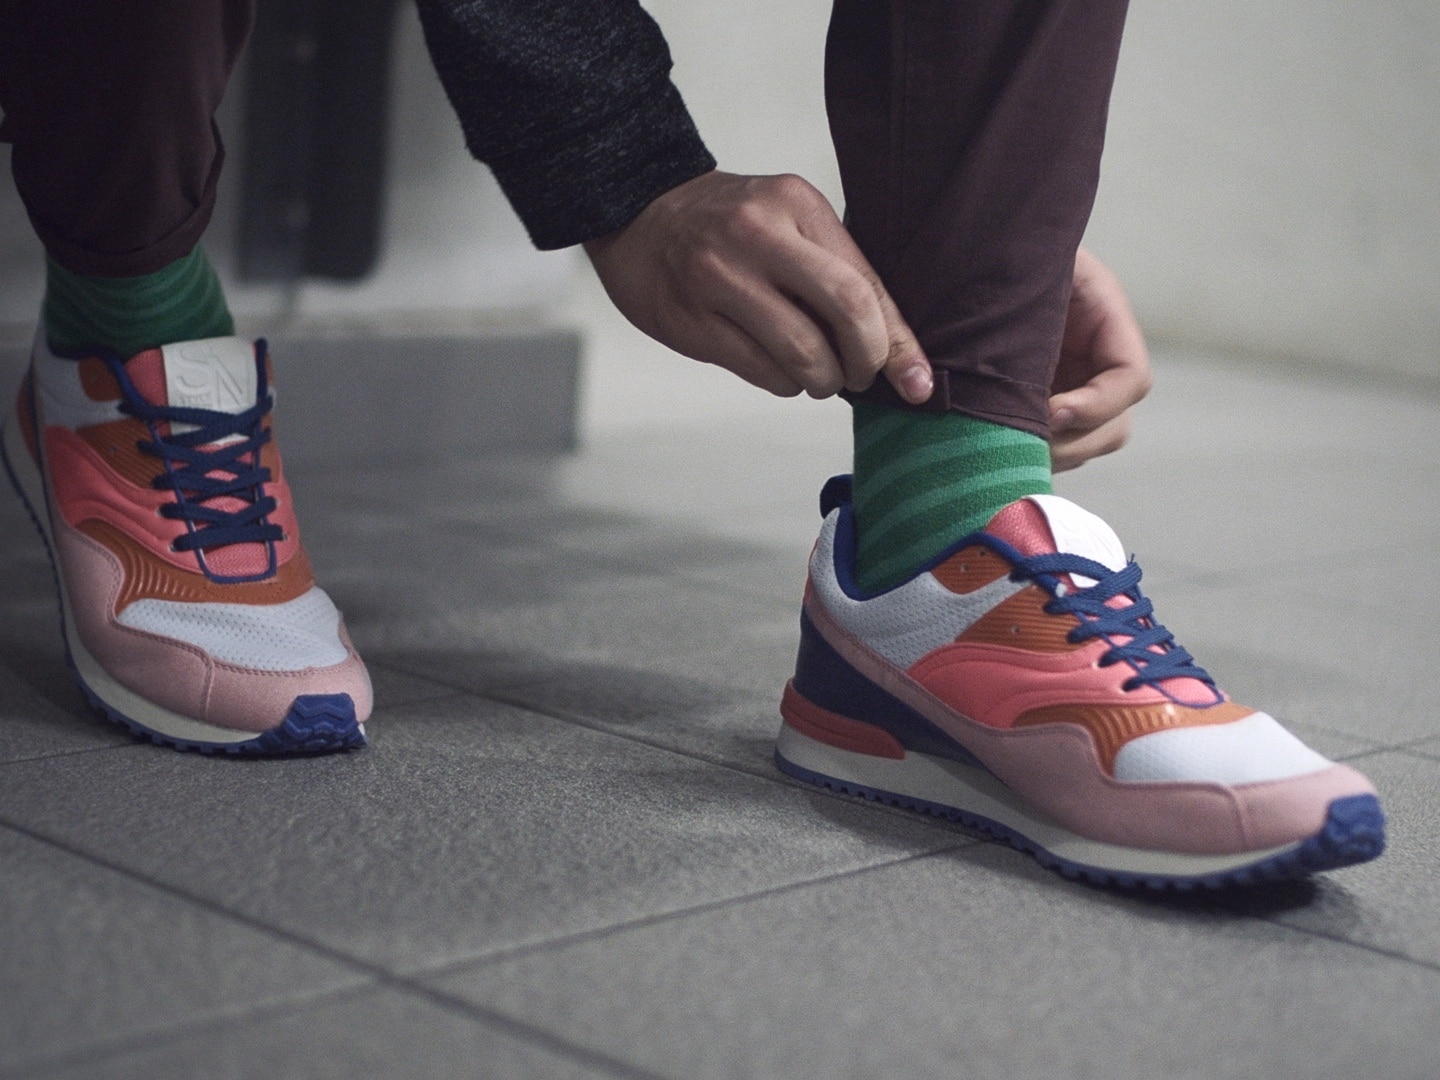 A guy in brightly colored trainers, with cuffed pants.